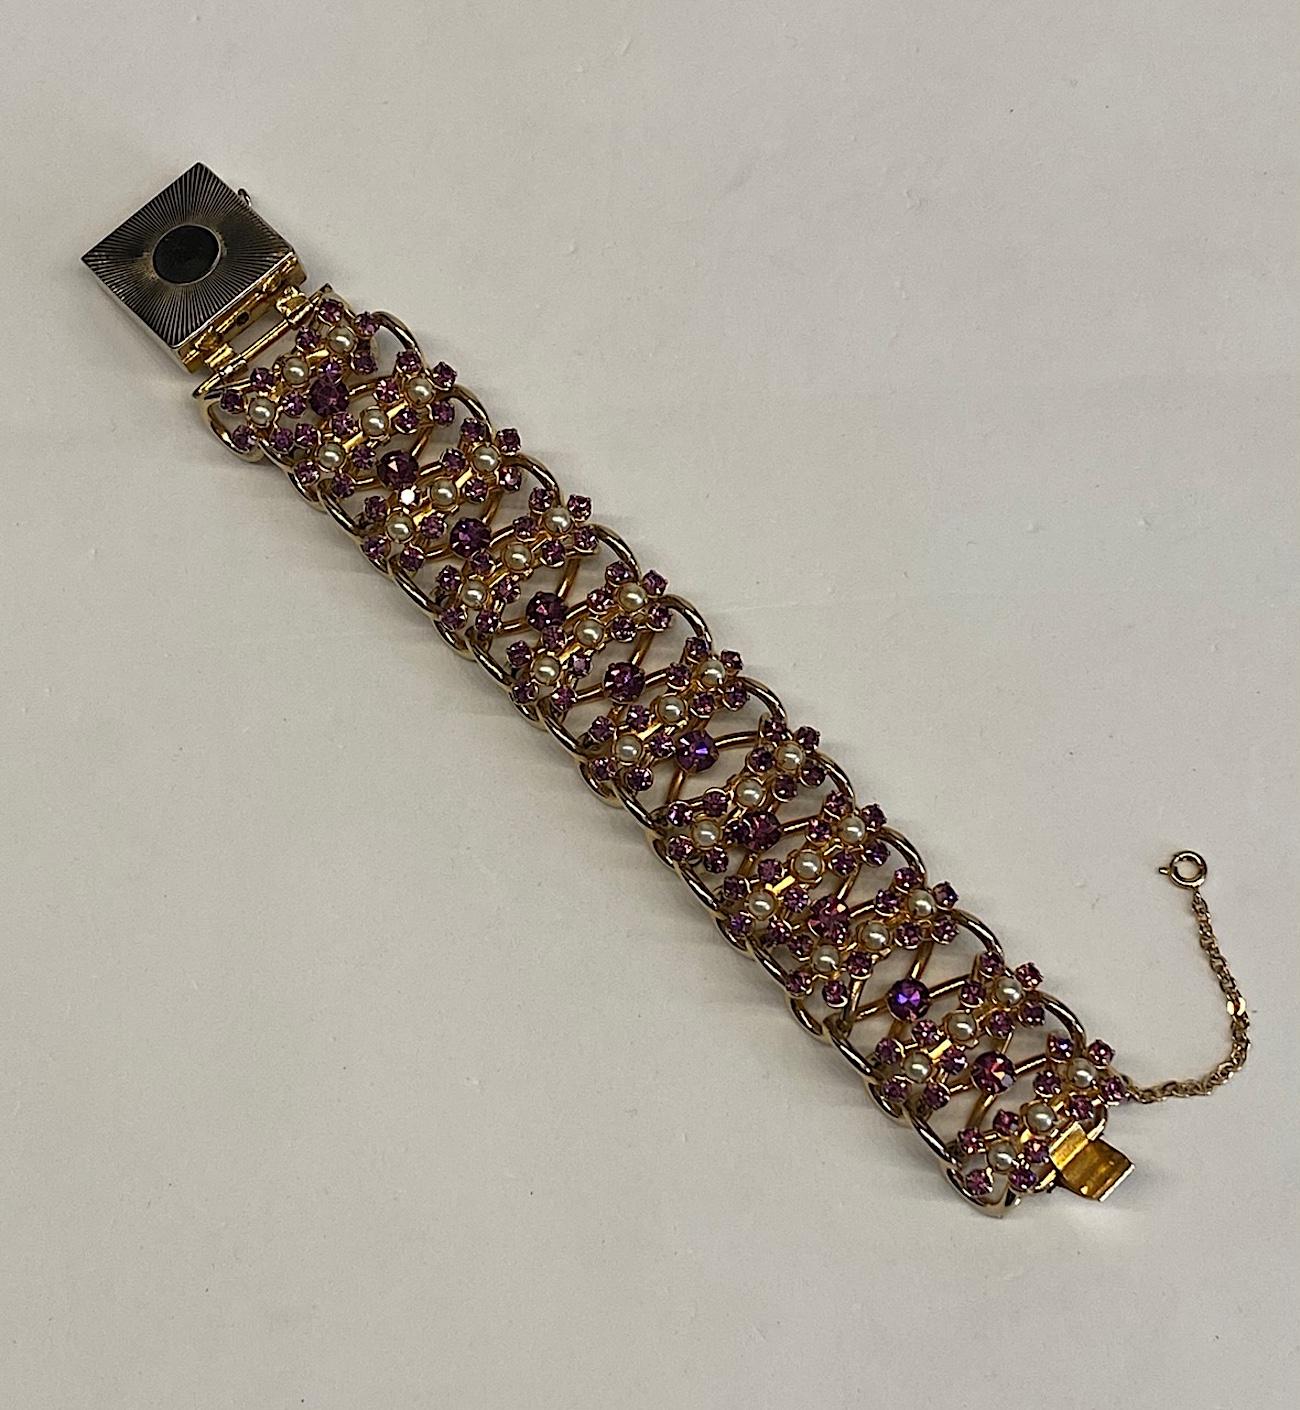 A 1950s unusual, three dimensional and large gold tone large link statement bracelet with purple rhinestone accents. The bracelet consist of large .58 inch wide by 1.13 long and .58 inch high links made of thick metal wire or cord. Not only is the